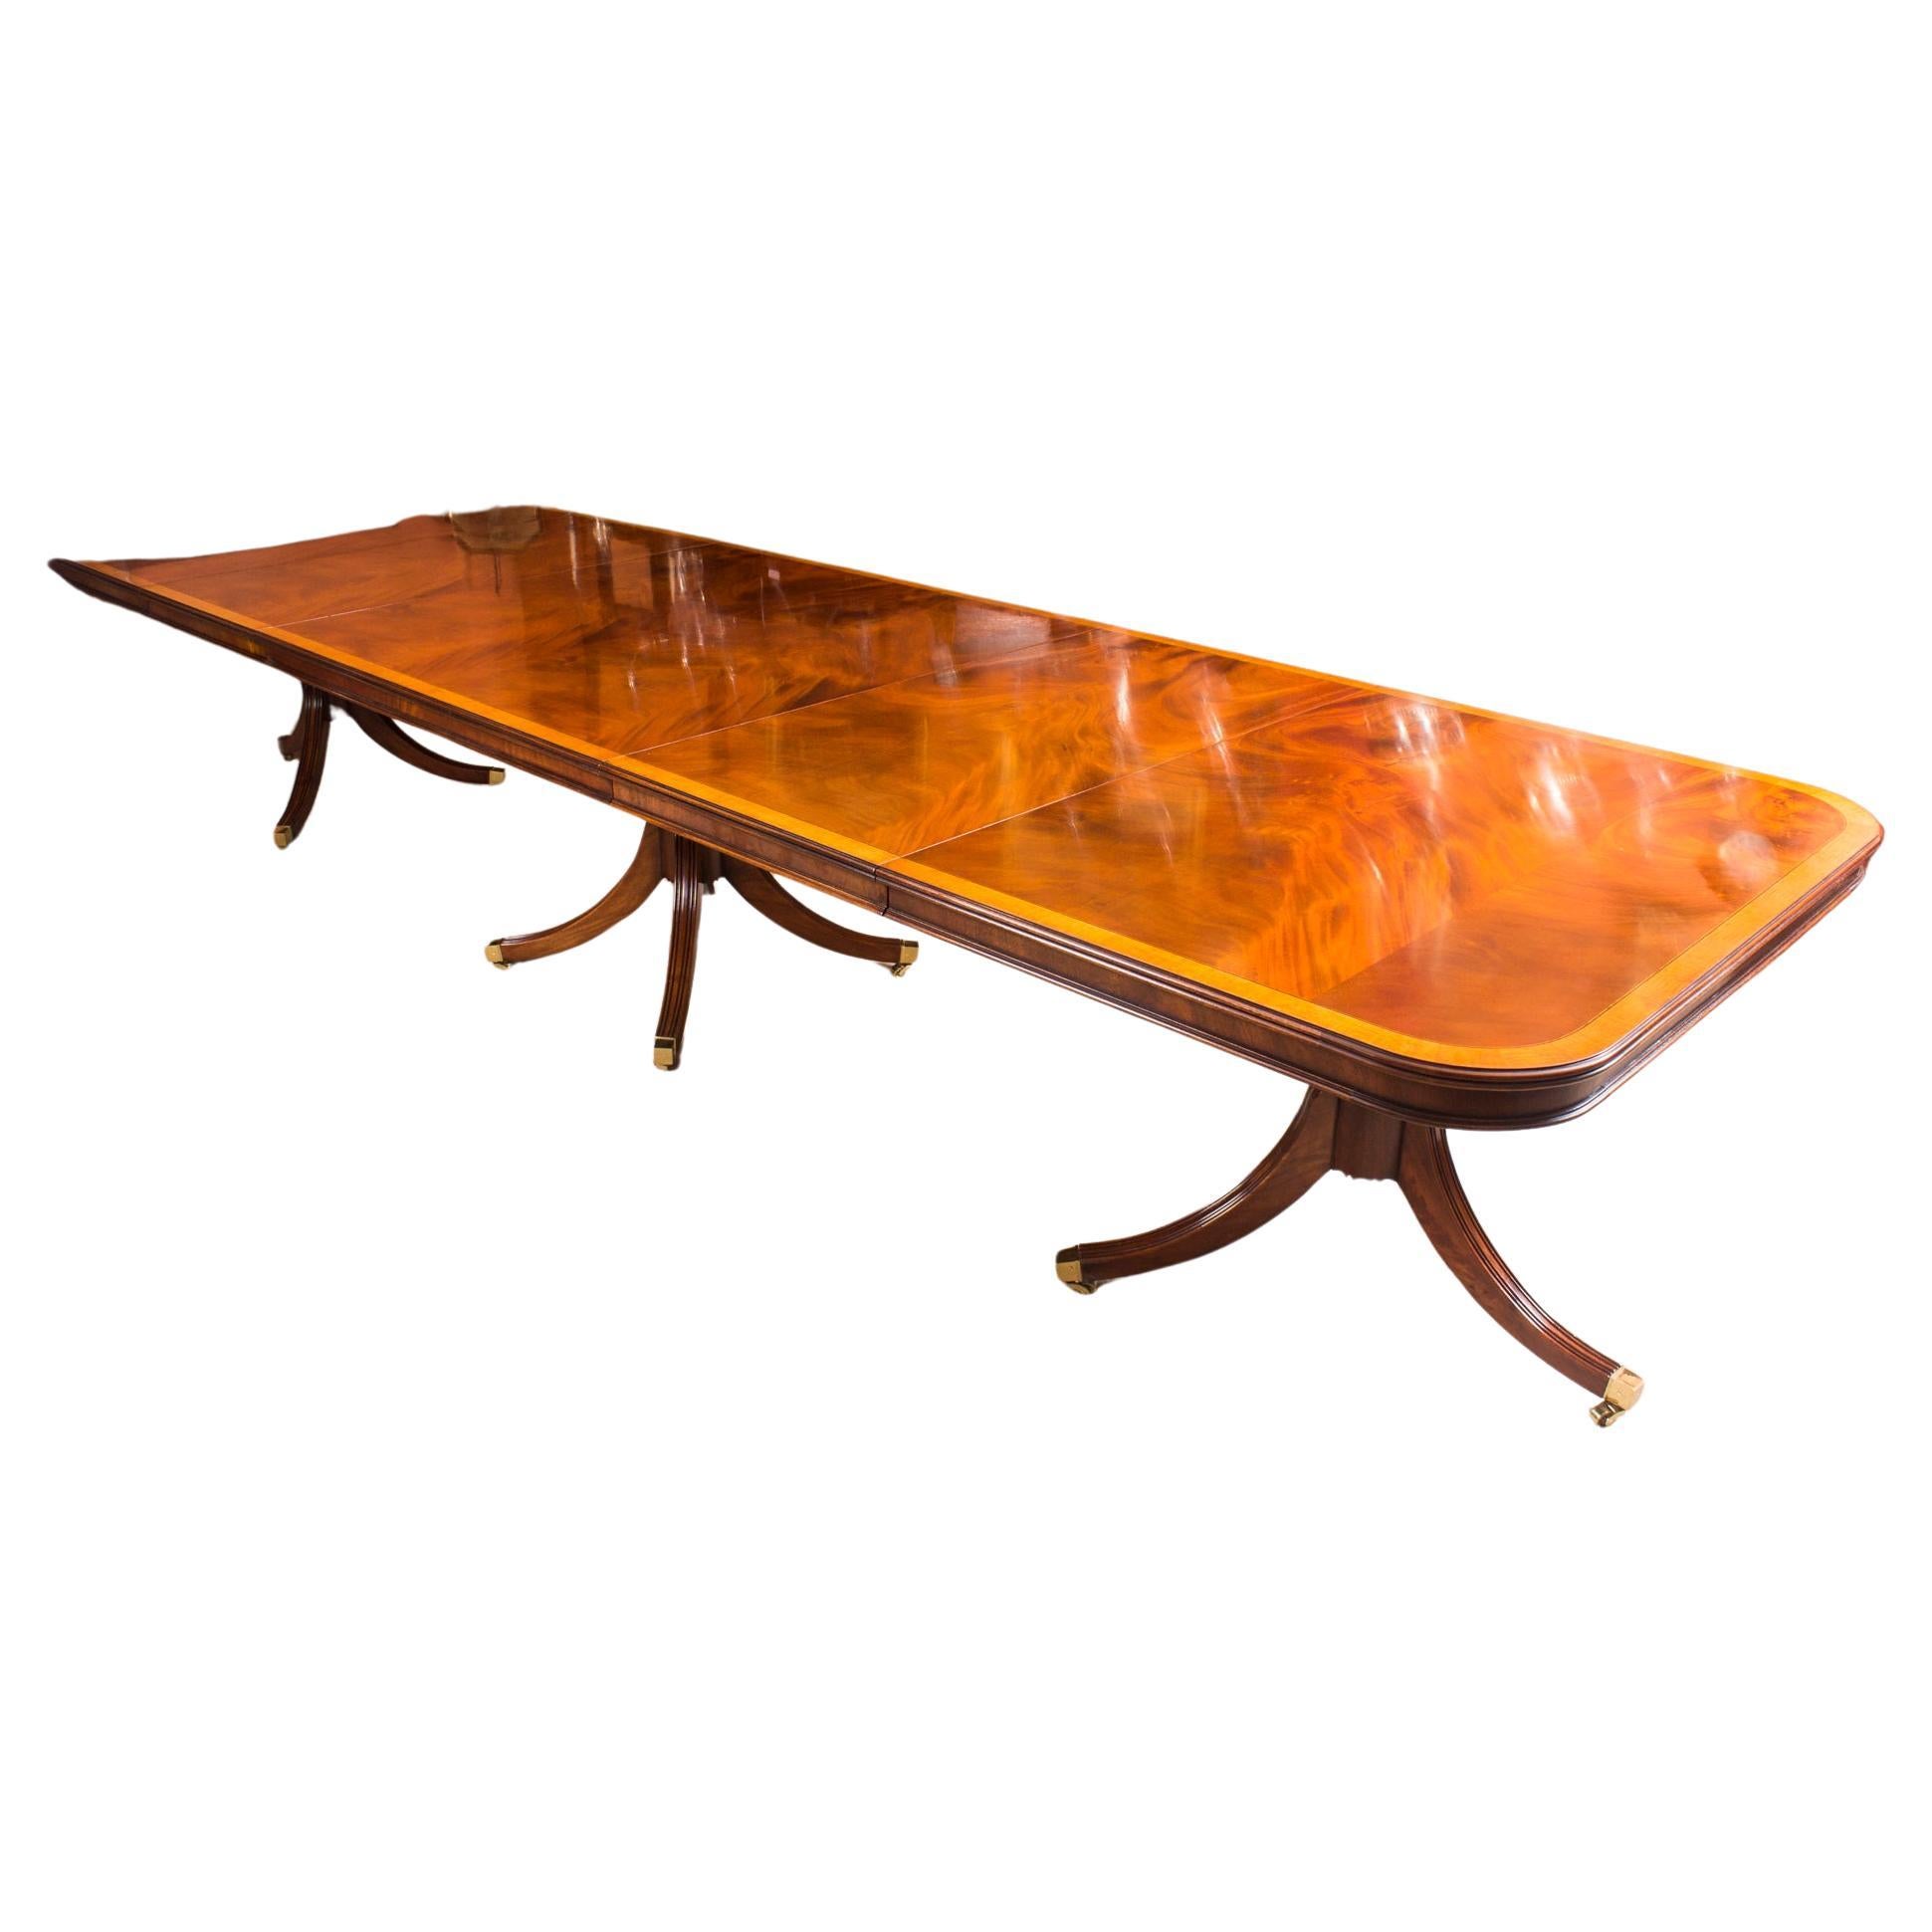 Vintage 14ft Regency Style Dining Table Inlaid Flame Mahogany 20th Century For Sale